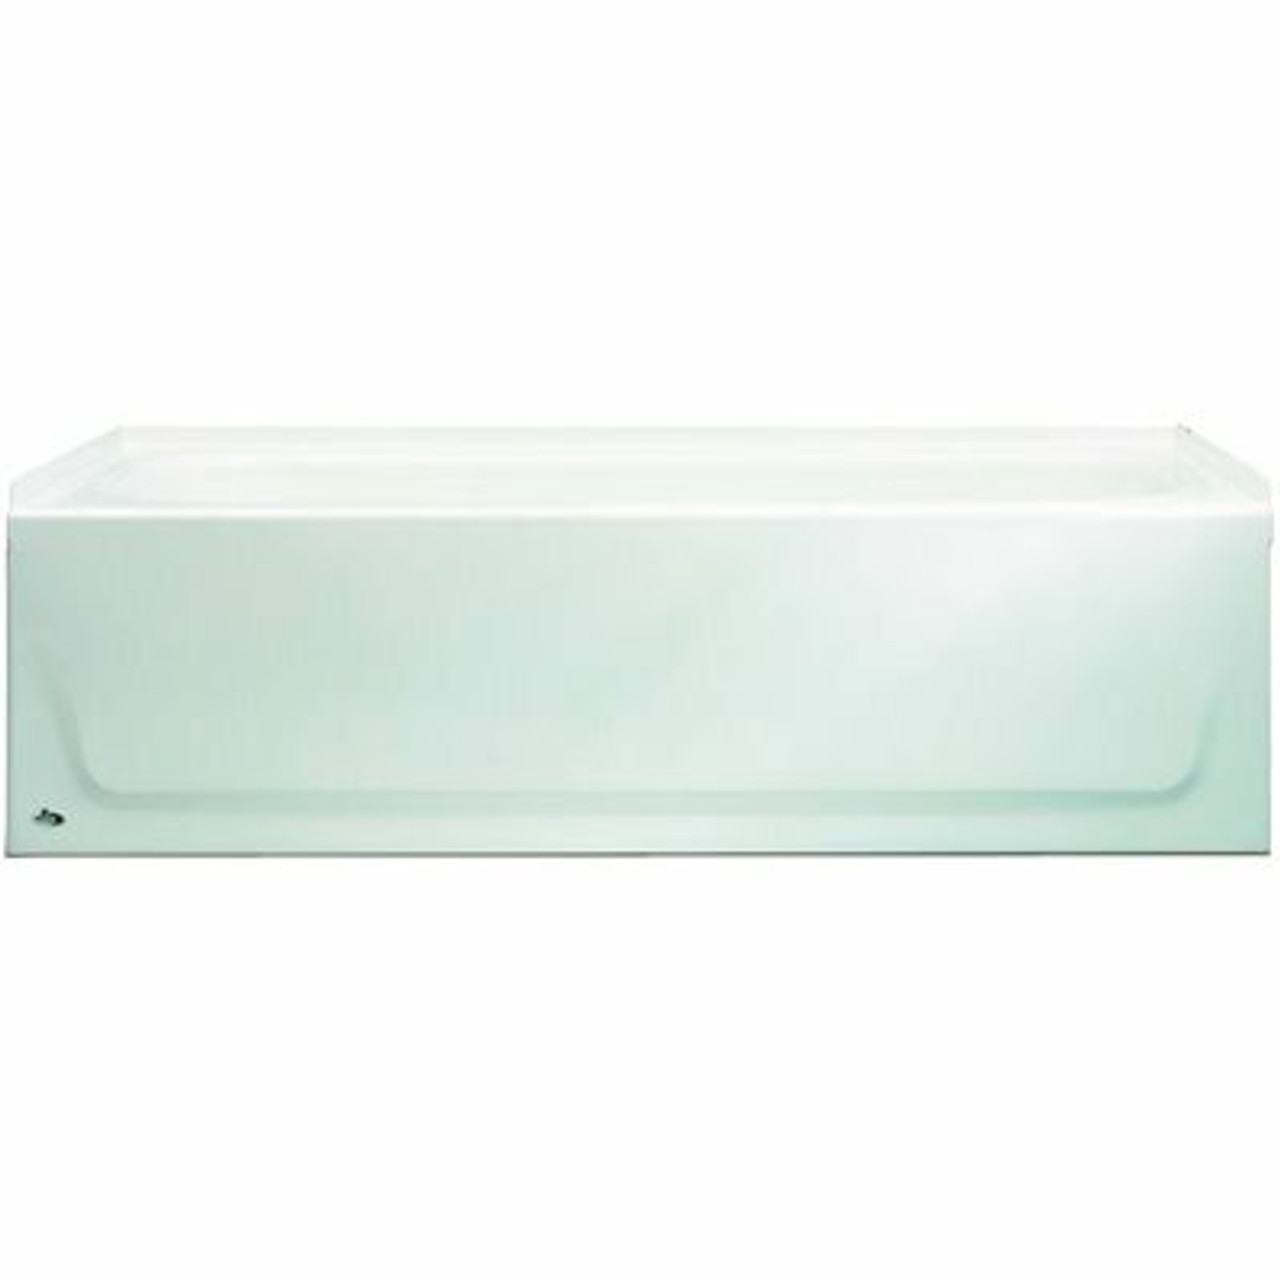 Bootz Industries Aloha Afr 60 In. Right Drain Raised Outlet Rectangular Alcove Soaking Bathtub In White